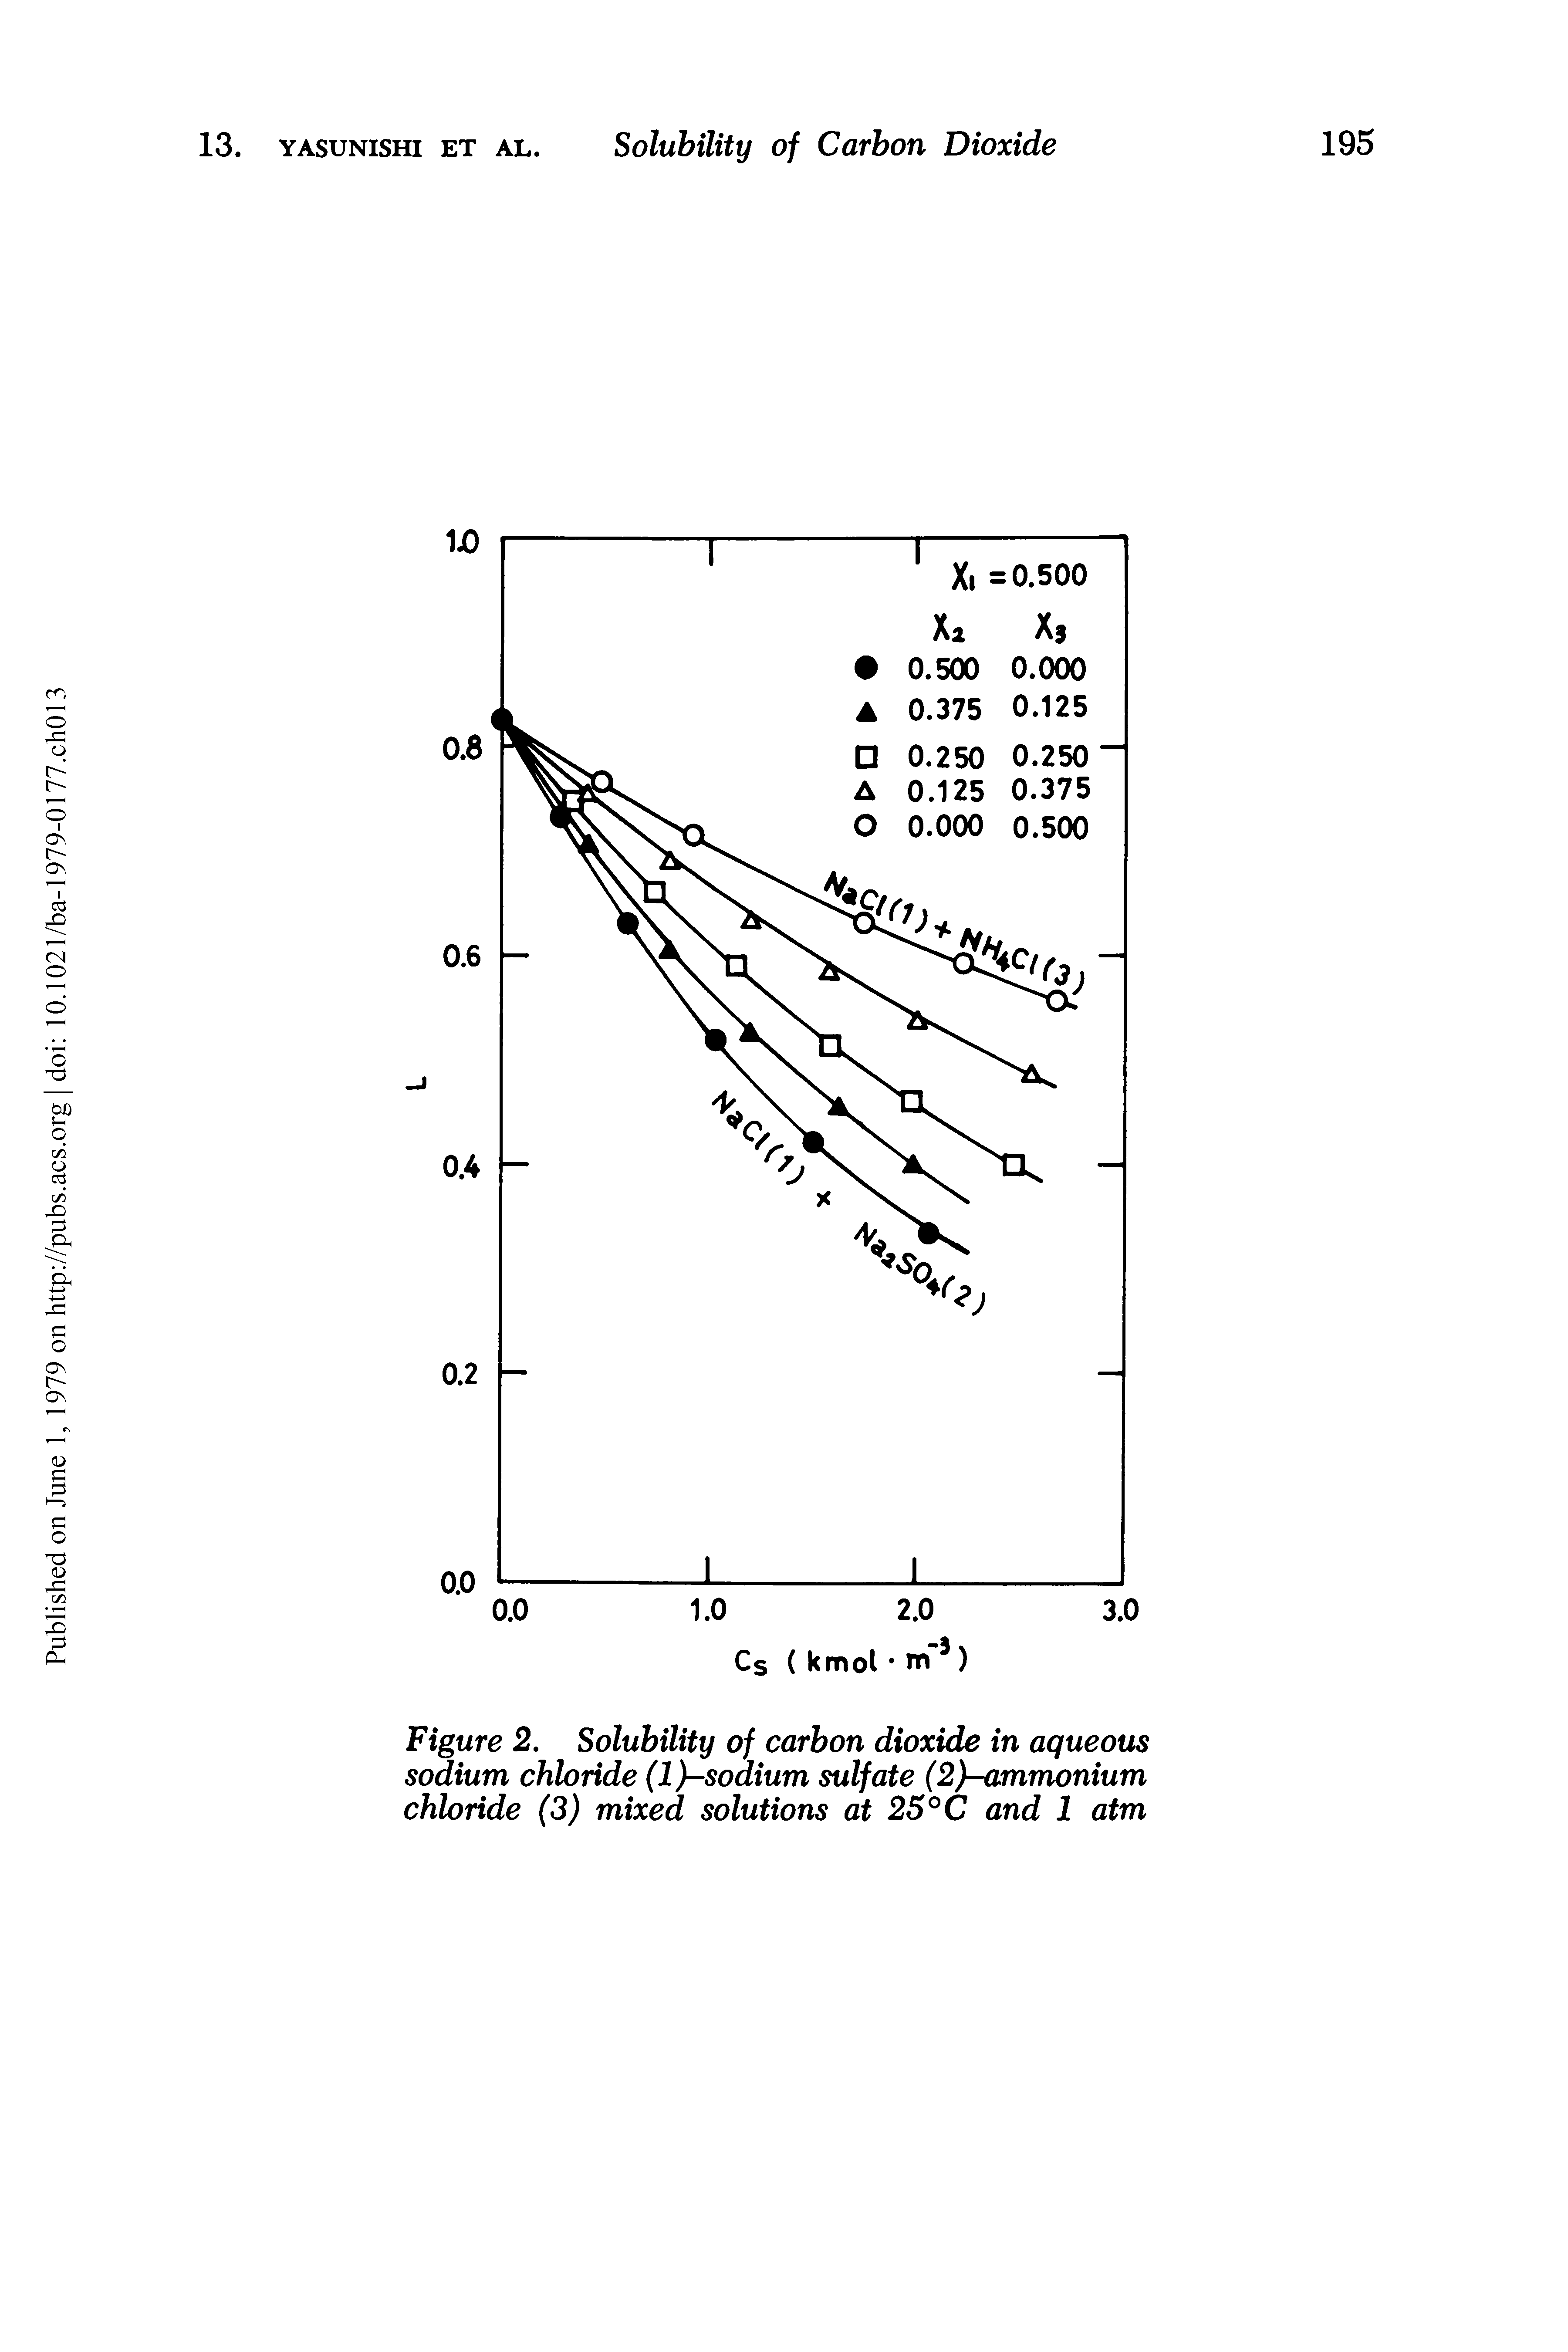 Figure 2. Solubility of carbon dioxide in aqueous sodium chloride (1 )-sodium sulfate (2 -ammonium chloride (3) mixed solutions at 25° C and 1 atm...